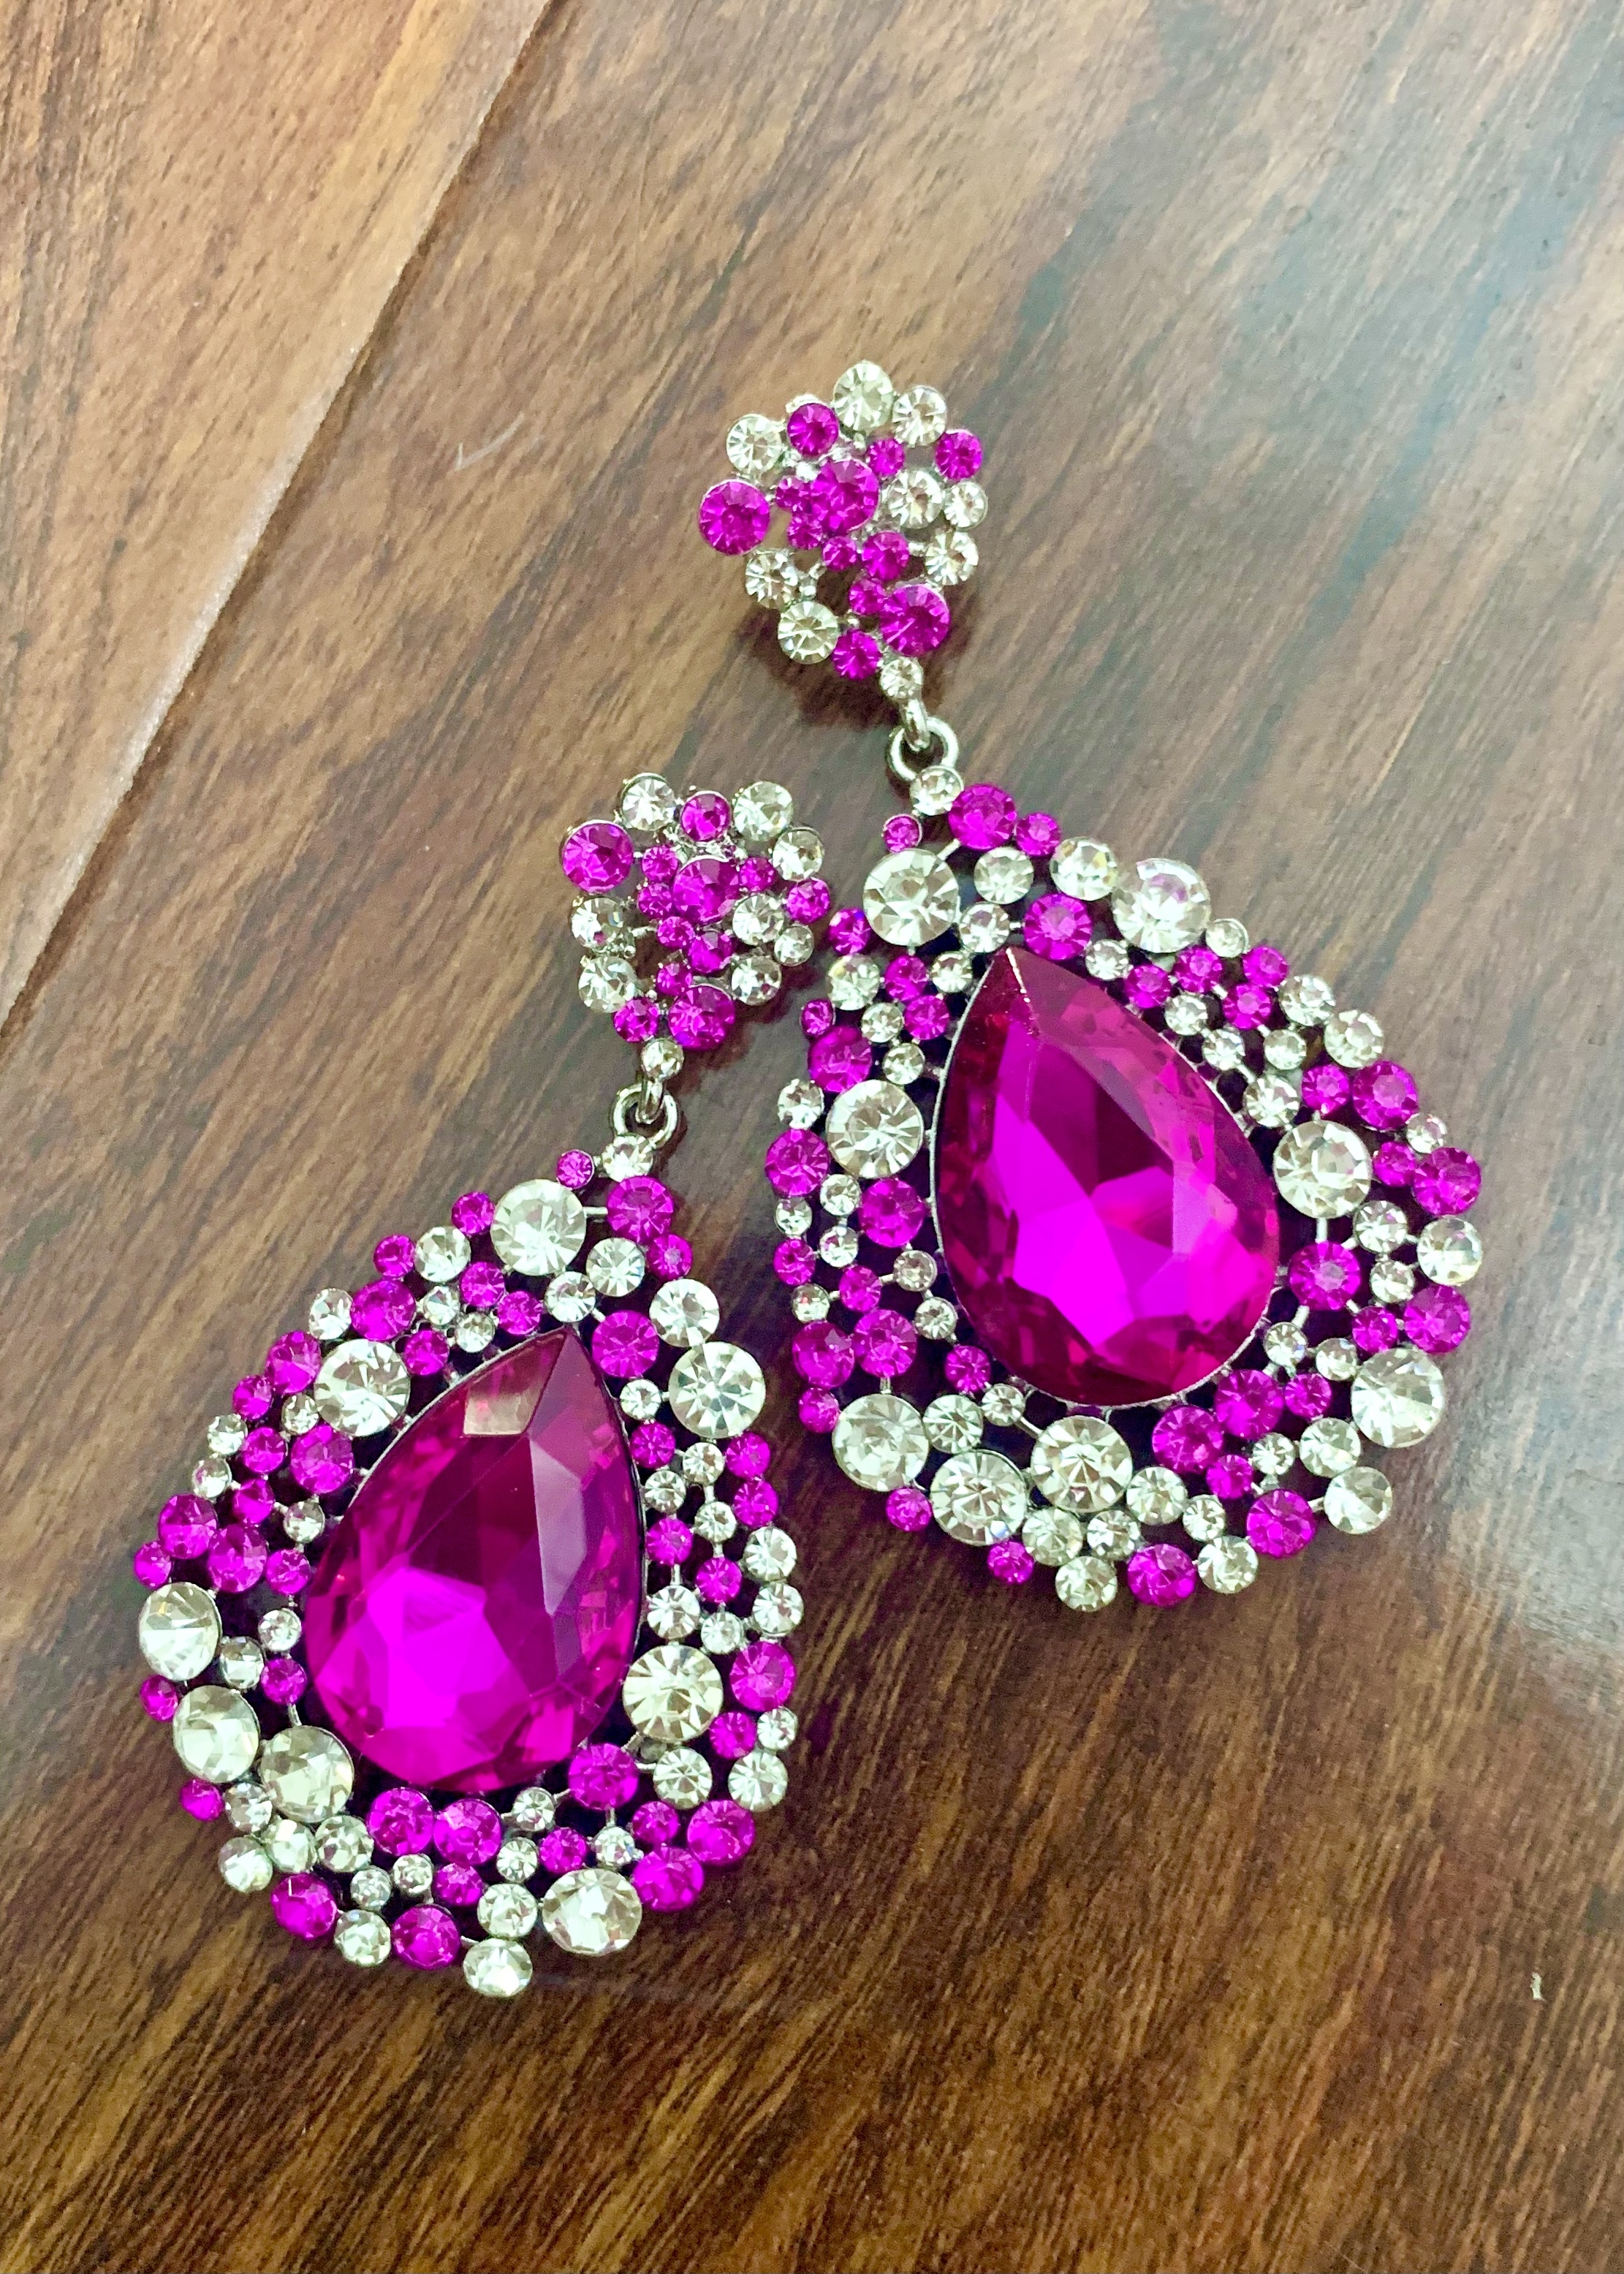 L&M Bling Pageant, Prom, Statement Jewelry, Long Pink Crystal Drop  Earrings - 3” long- $24 - LMBling.cóm